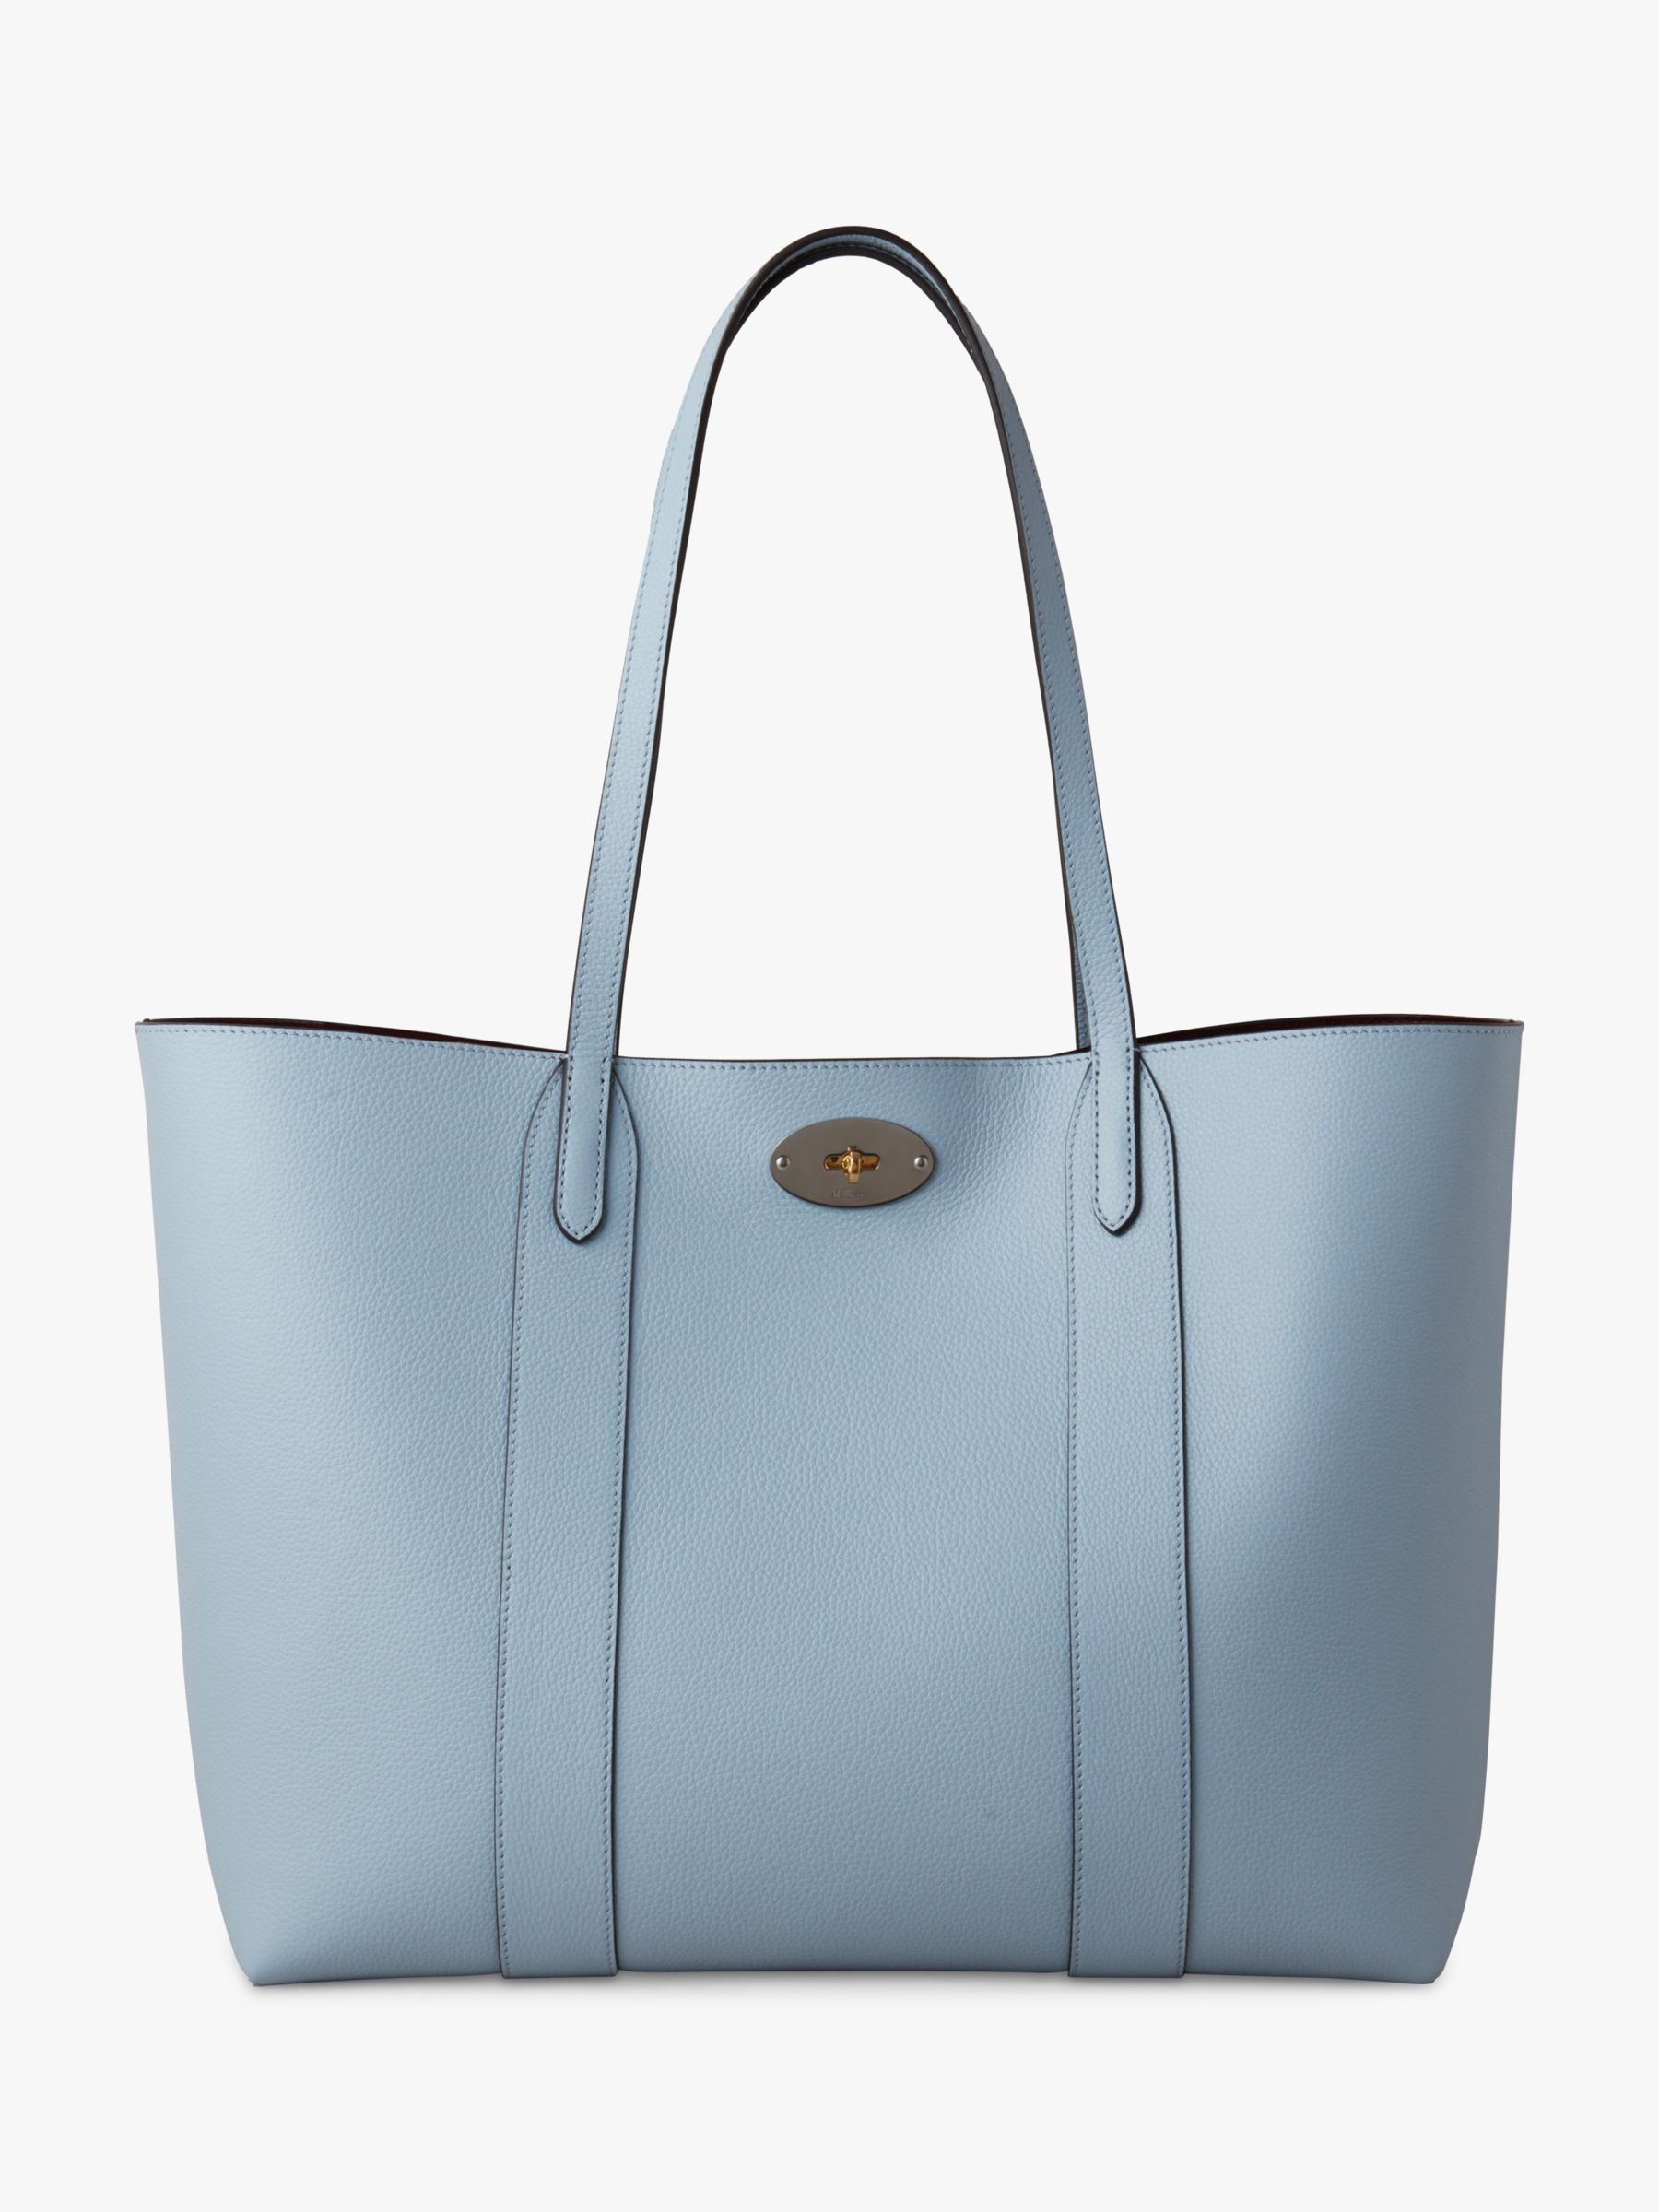 Mulberry Bayswater Small Classic Grain Leather Tote Bag, Poplin Blue ...